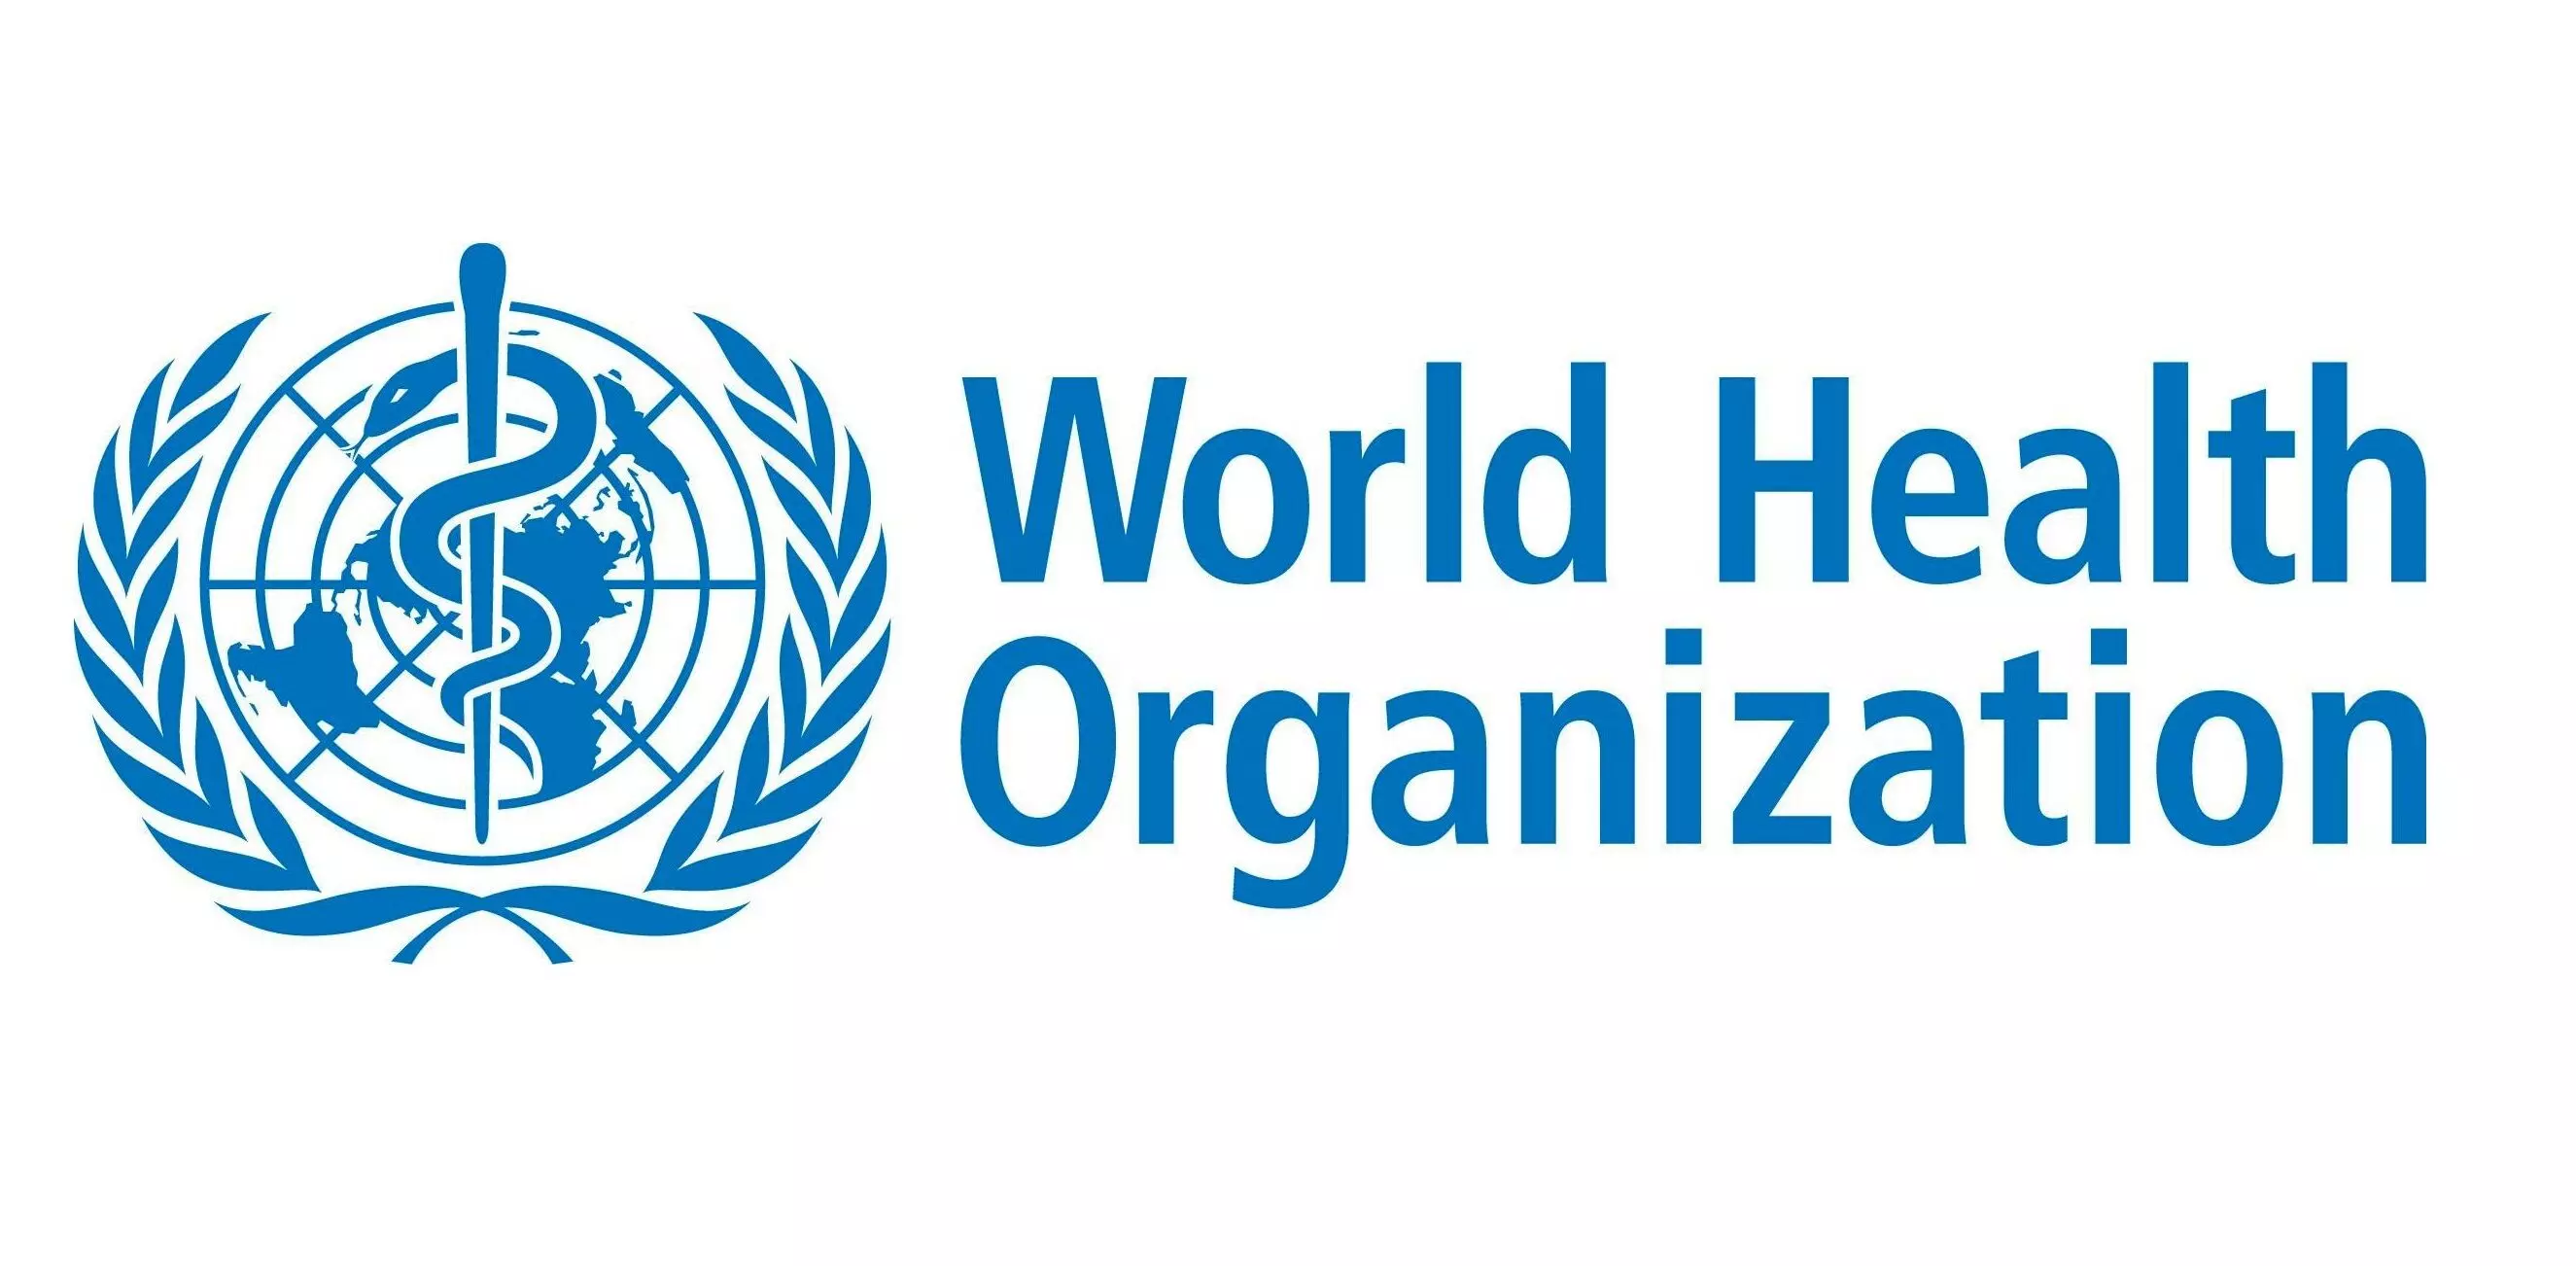 WHO Condemns Violence Against Healthcare Workers